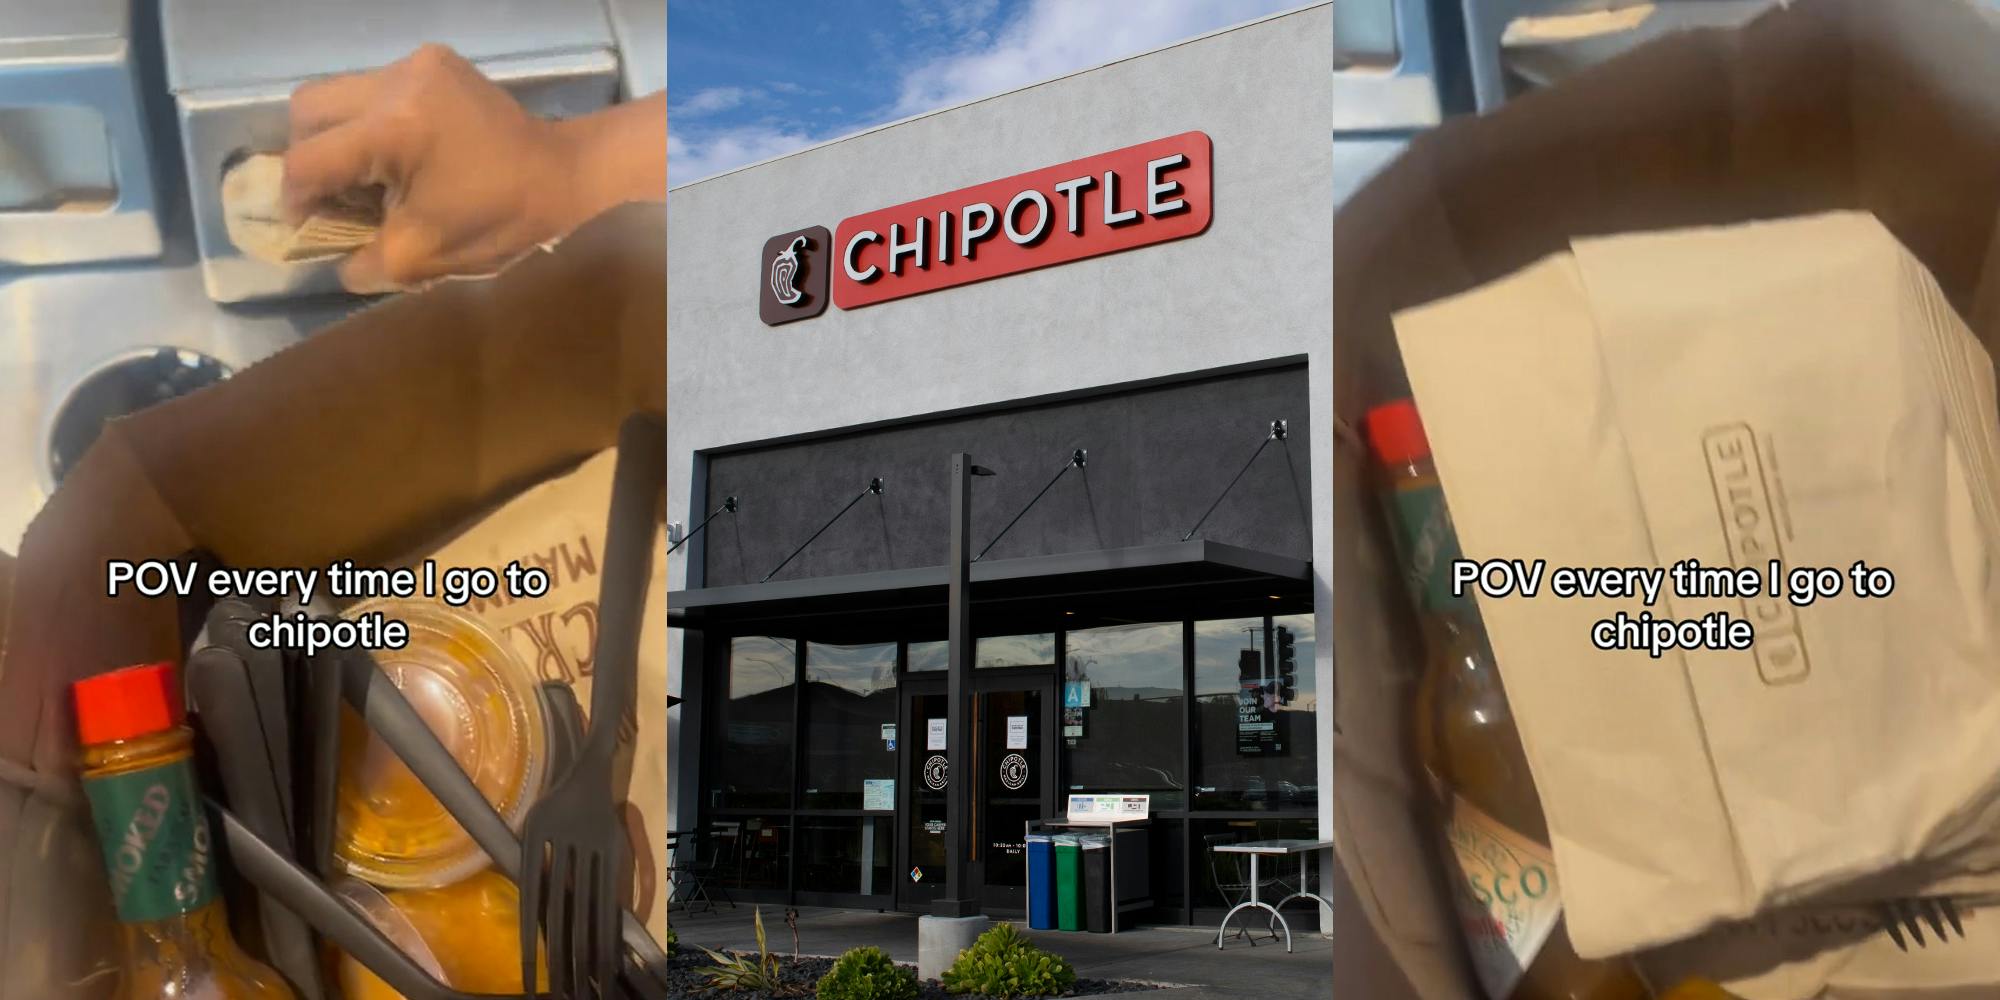 Chipotle customer grabbing pile of napkins with caption "POV every time I go to chipotle" (l) Chipotle building with sign (c) Chipotle bag full with caption "POV every time I go to Chipotle" (r)